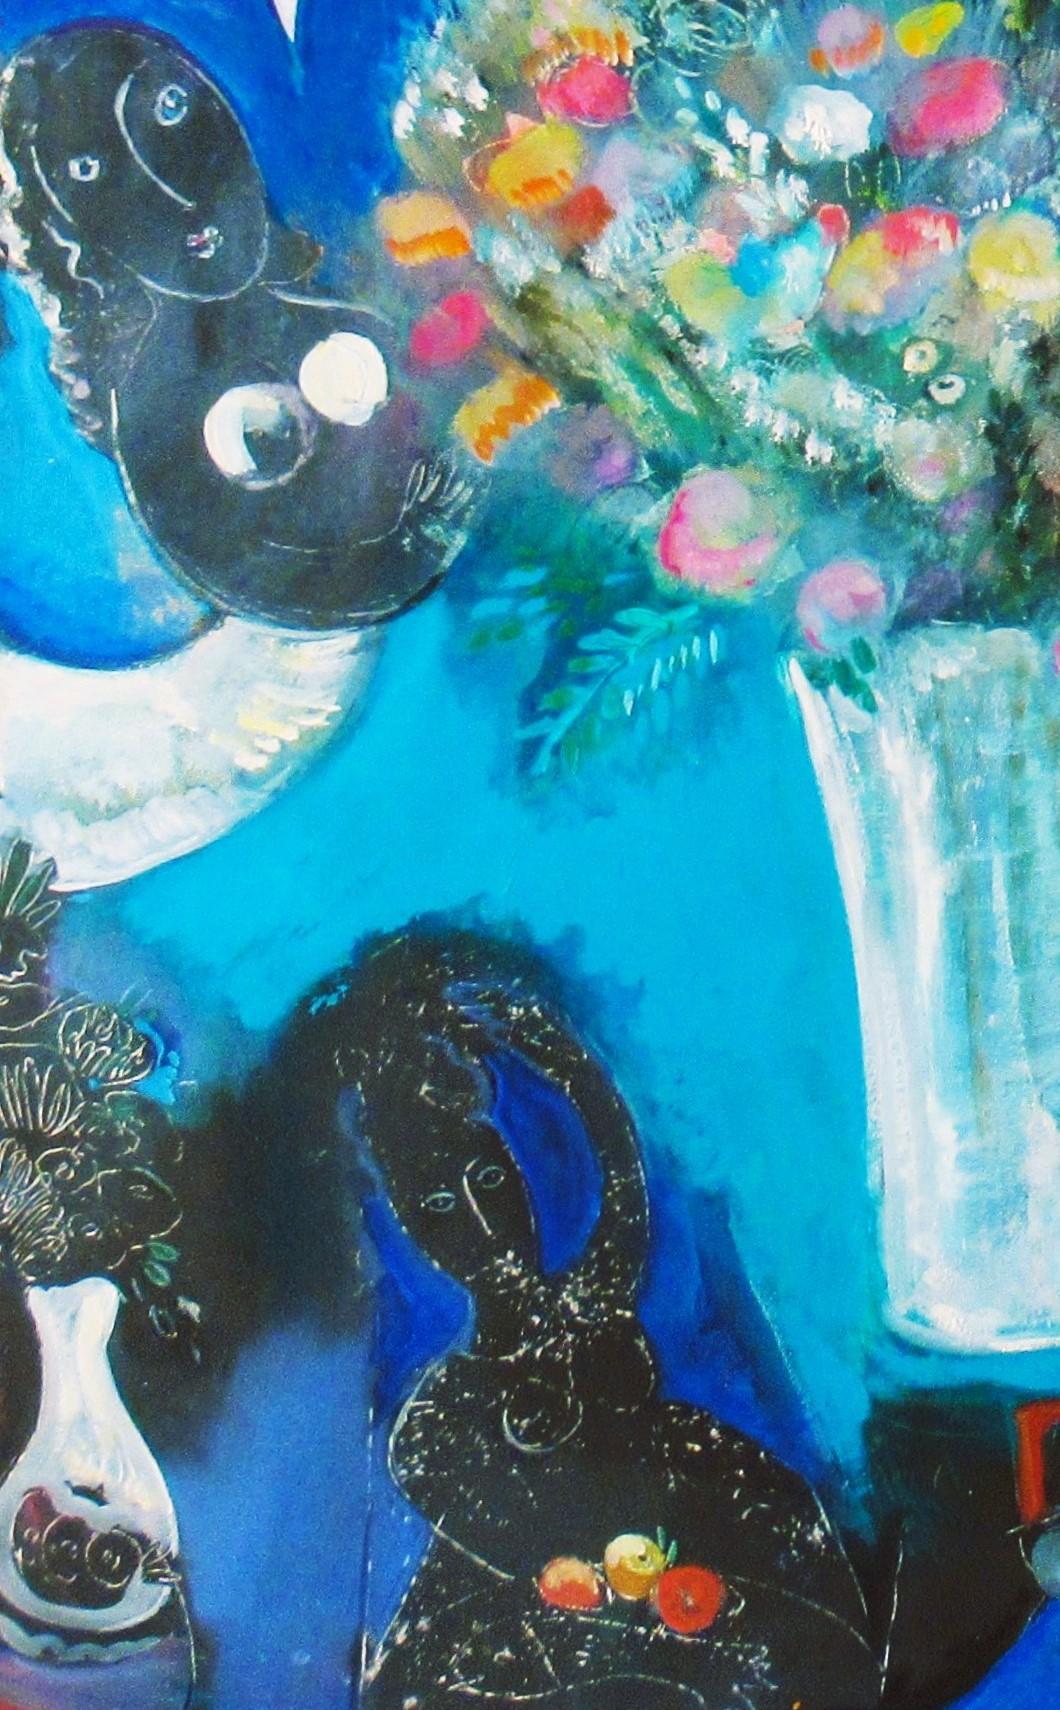 Flowers with Personages - American Modern Painting by Mary Zarbano